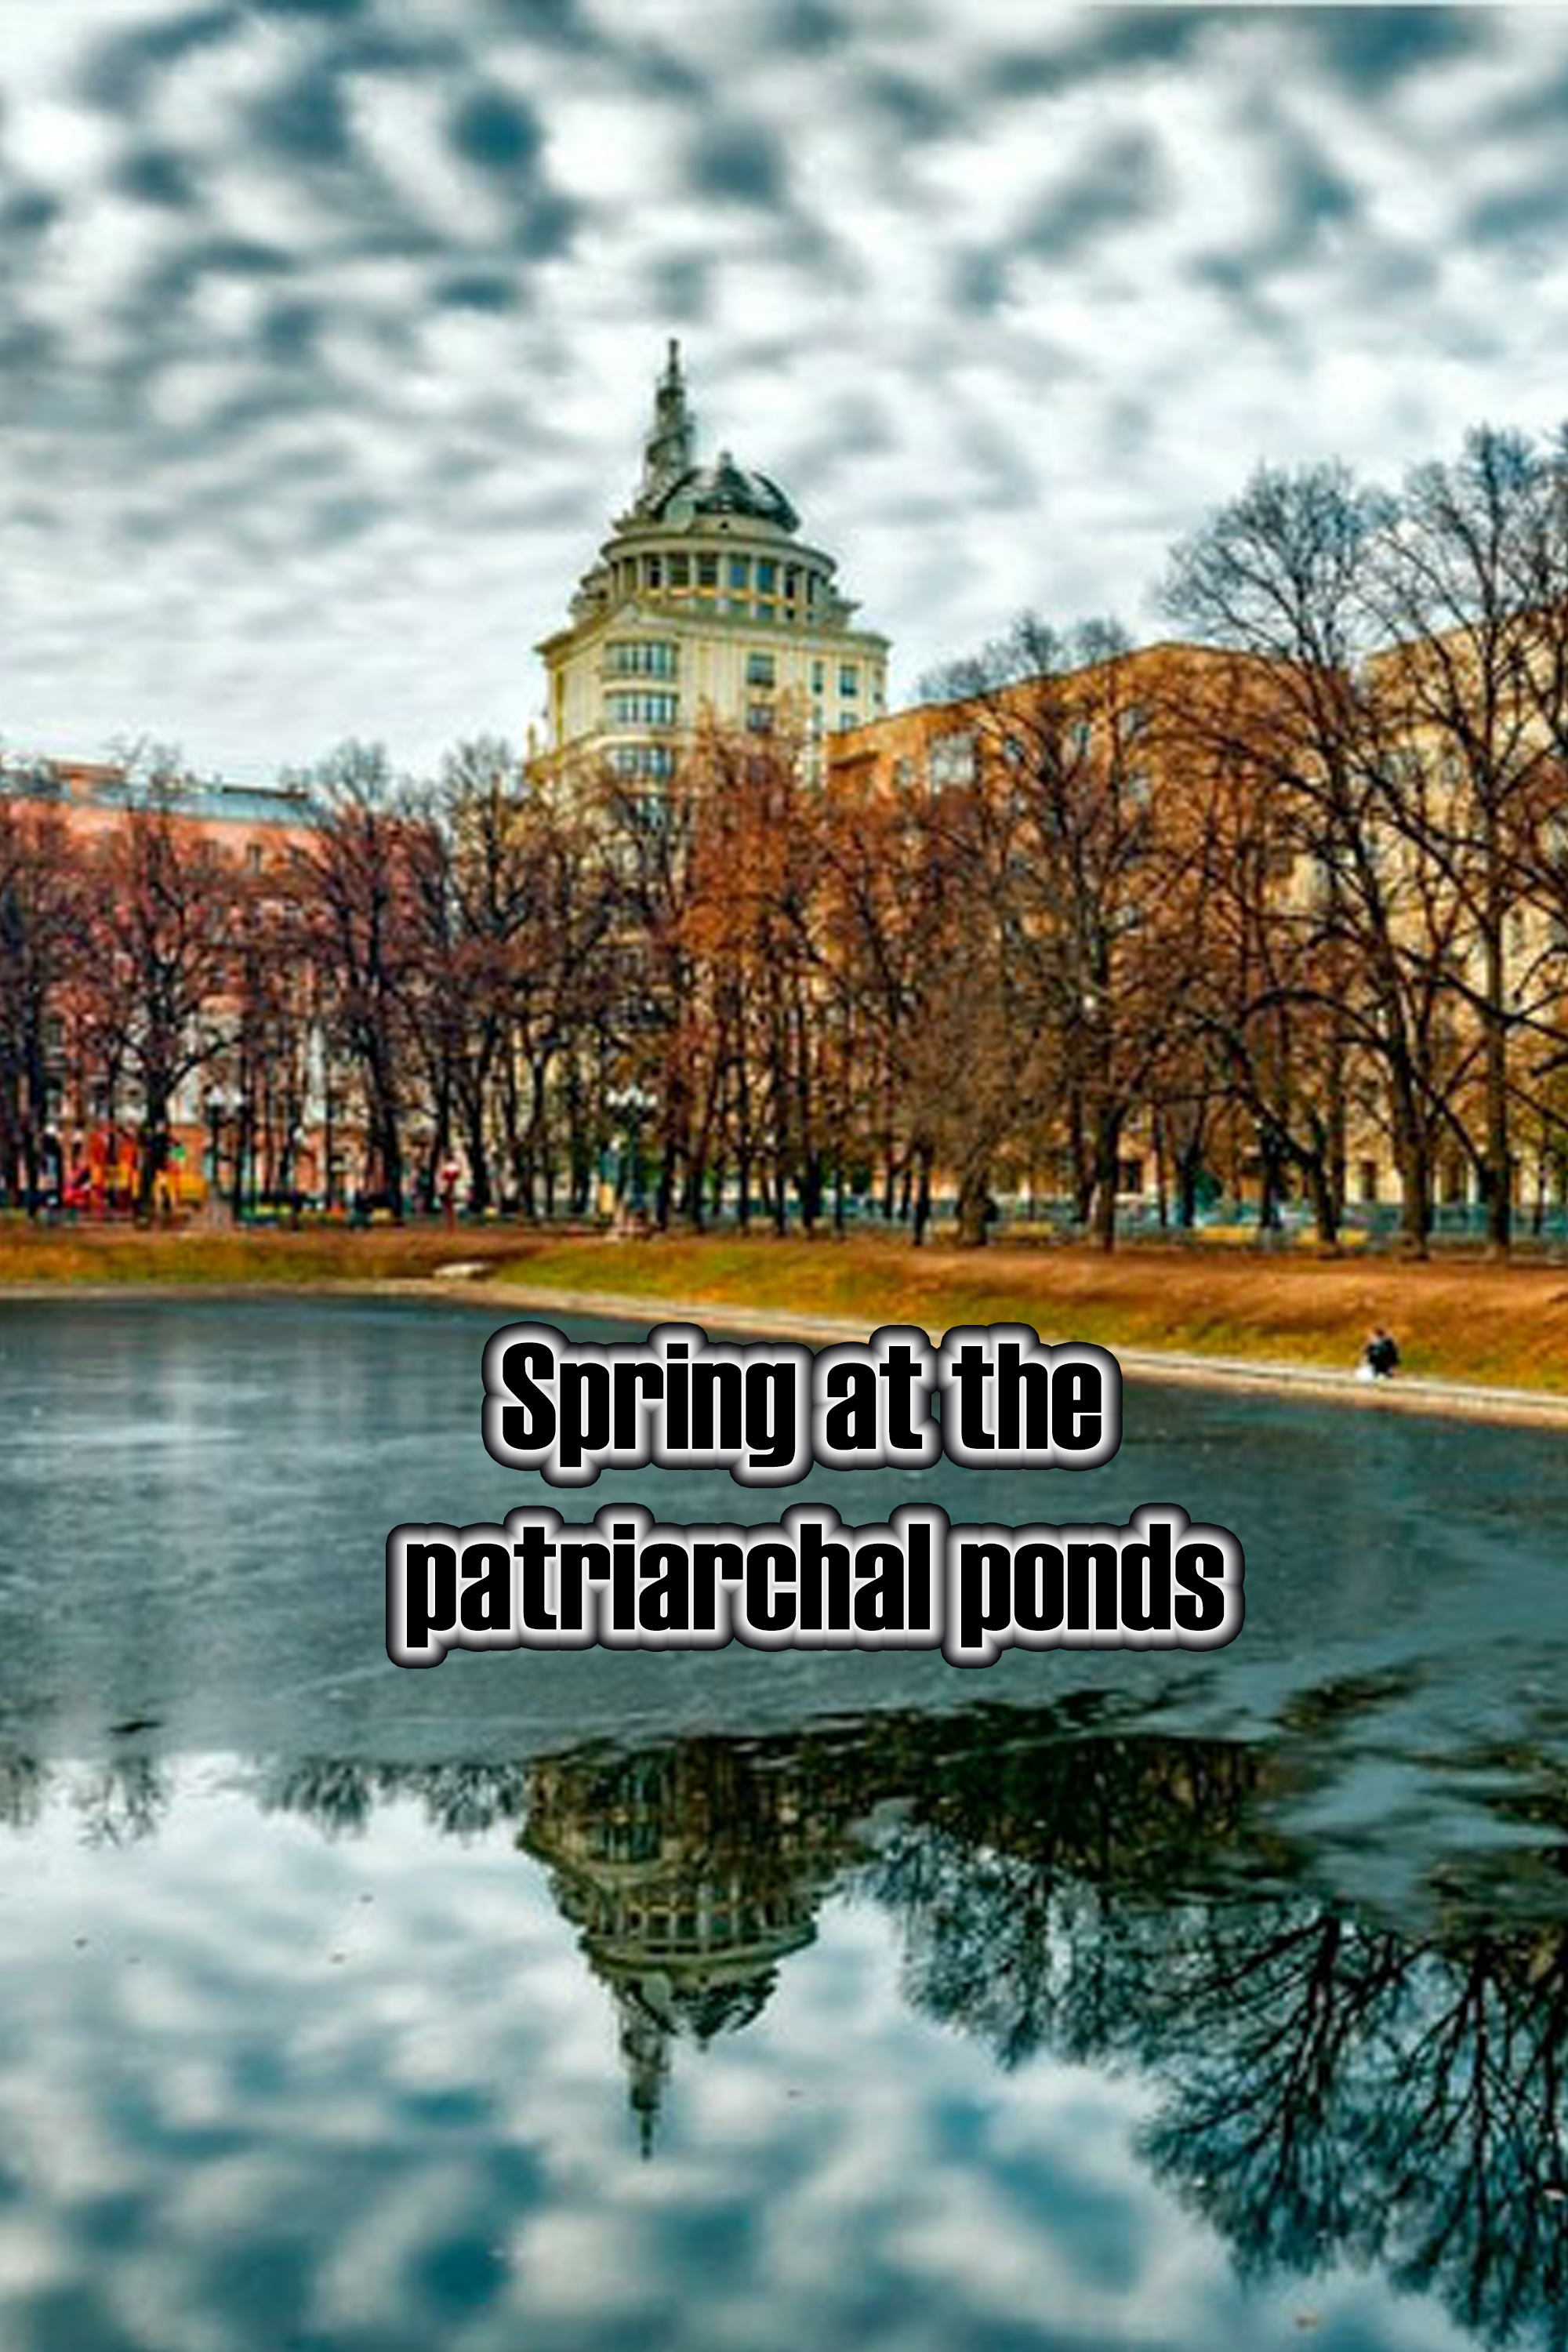 Spring at the patriarchal ponds